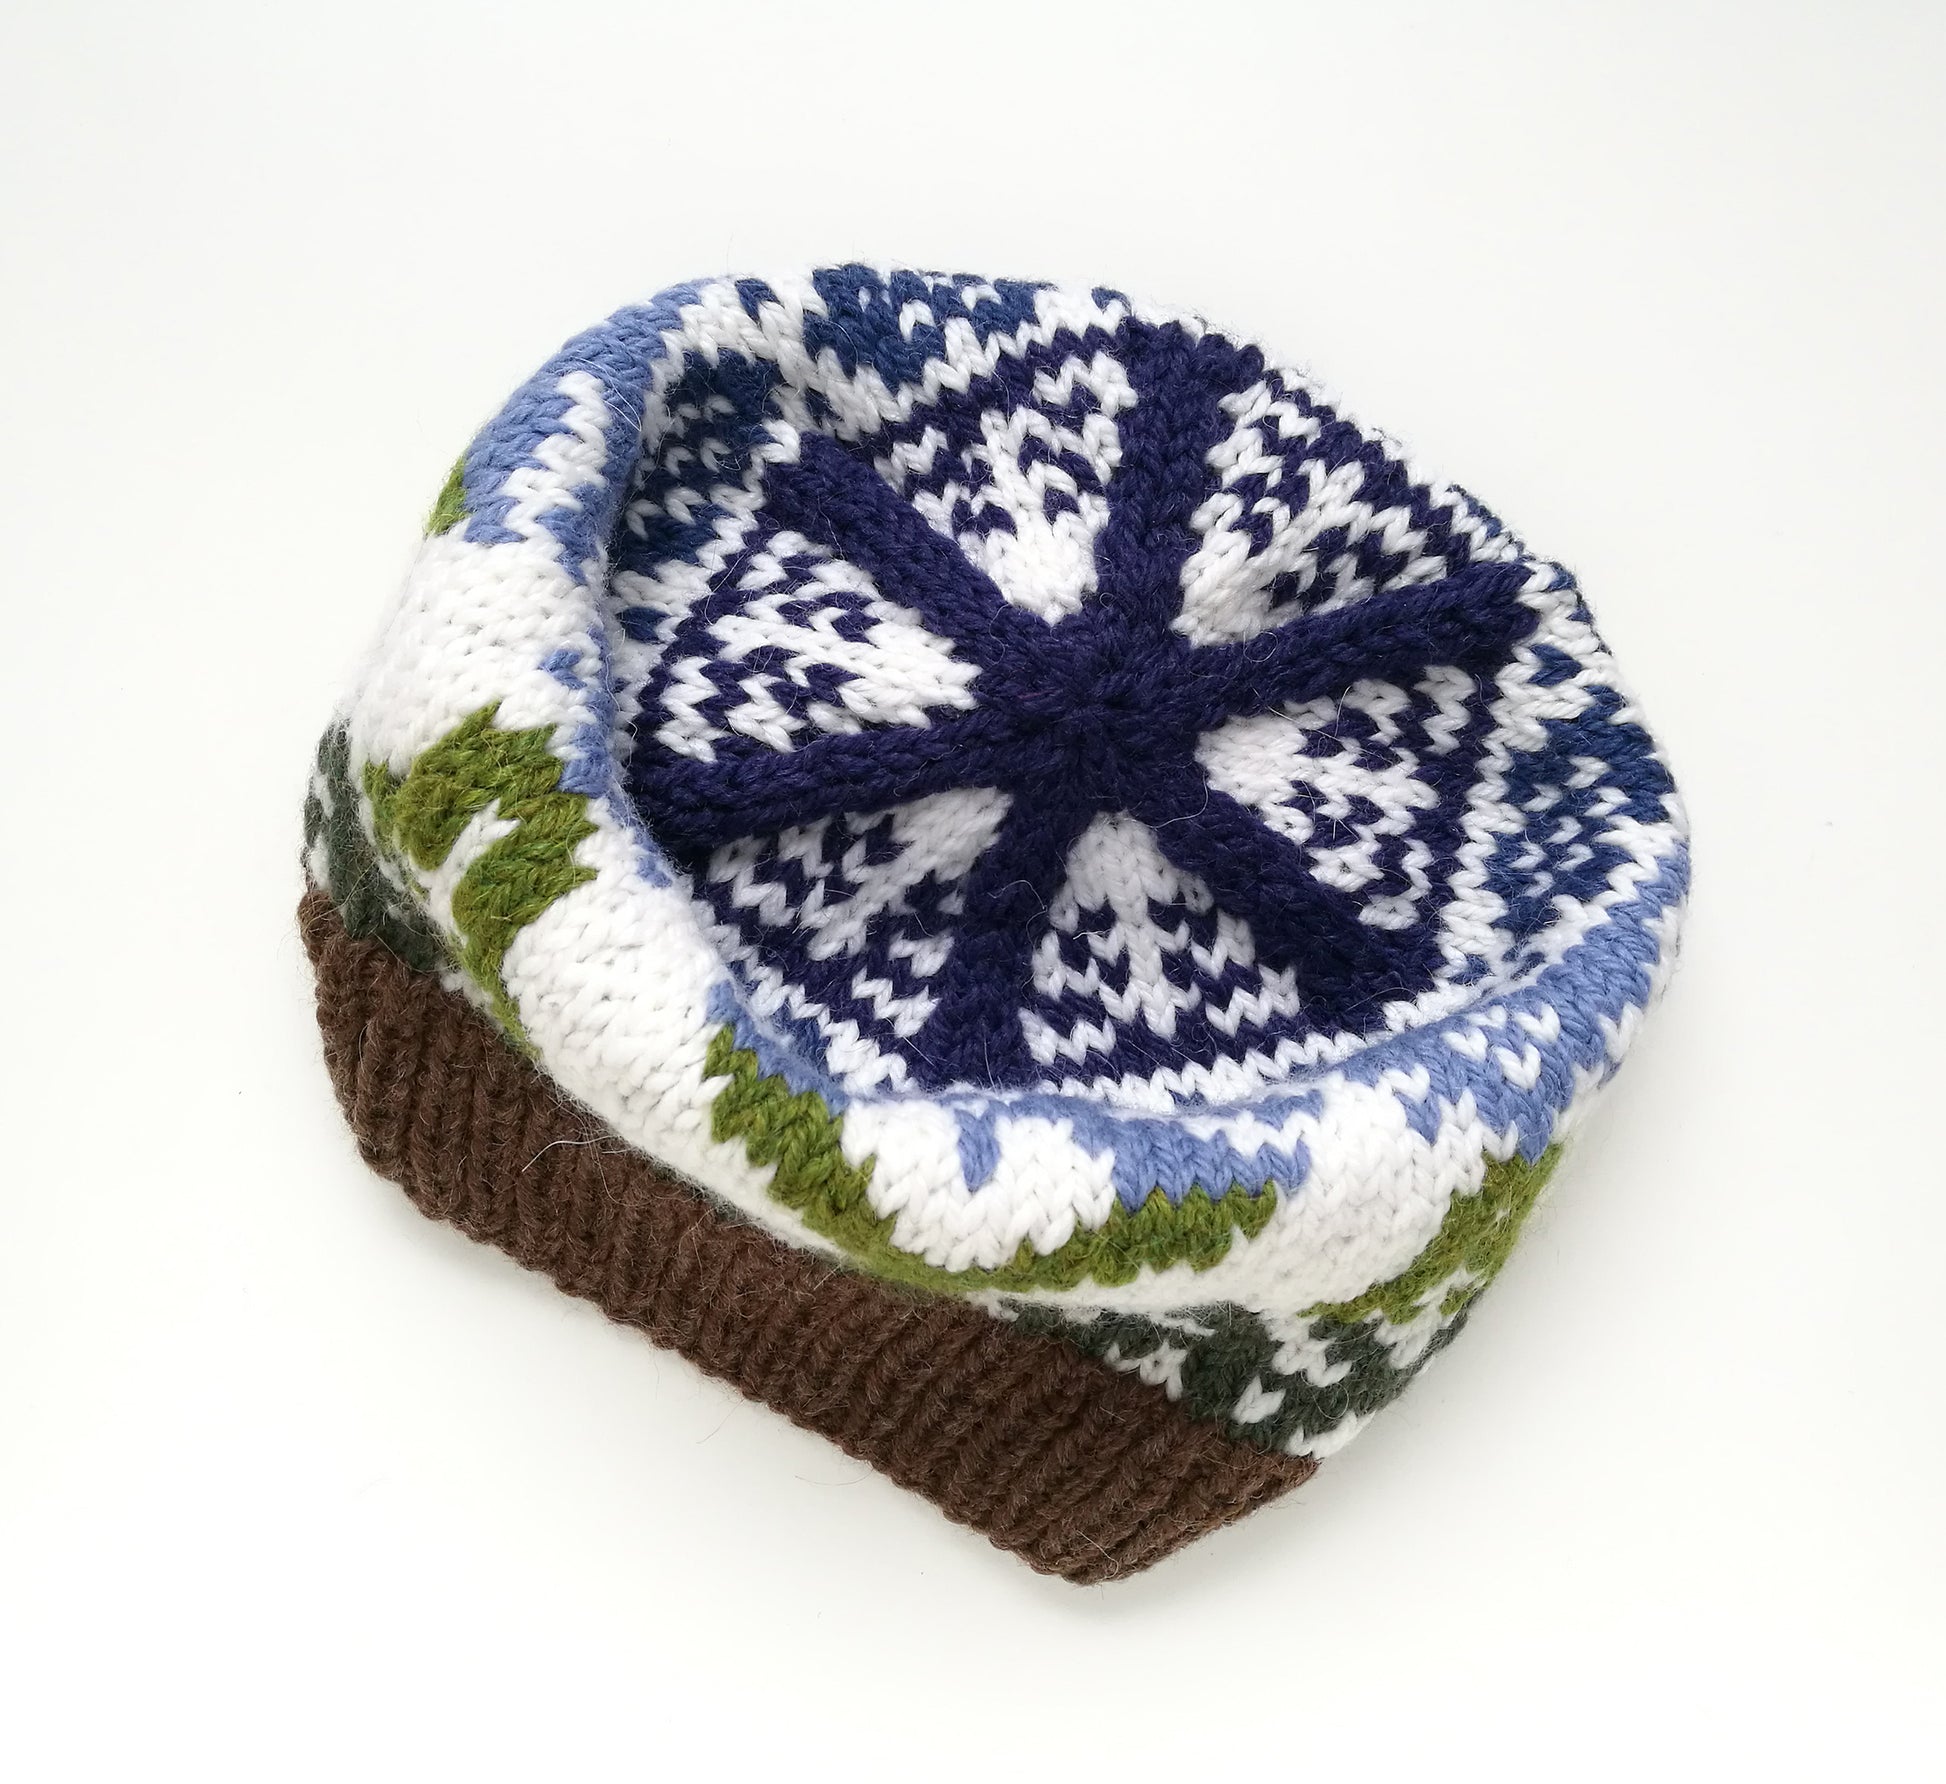 green, brown, blue and white wool hand-knitted Fair Isle beanie hat in Bunny Rabbit knitting pattern top view